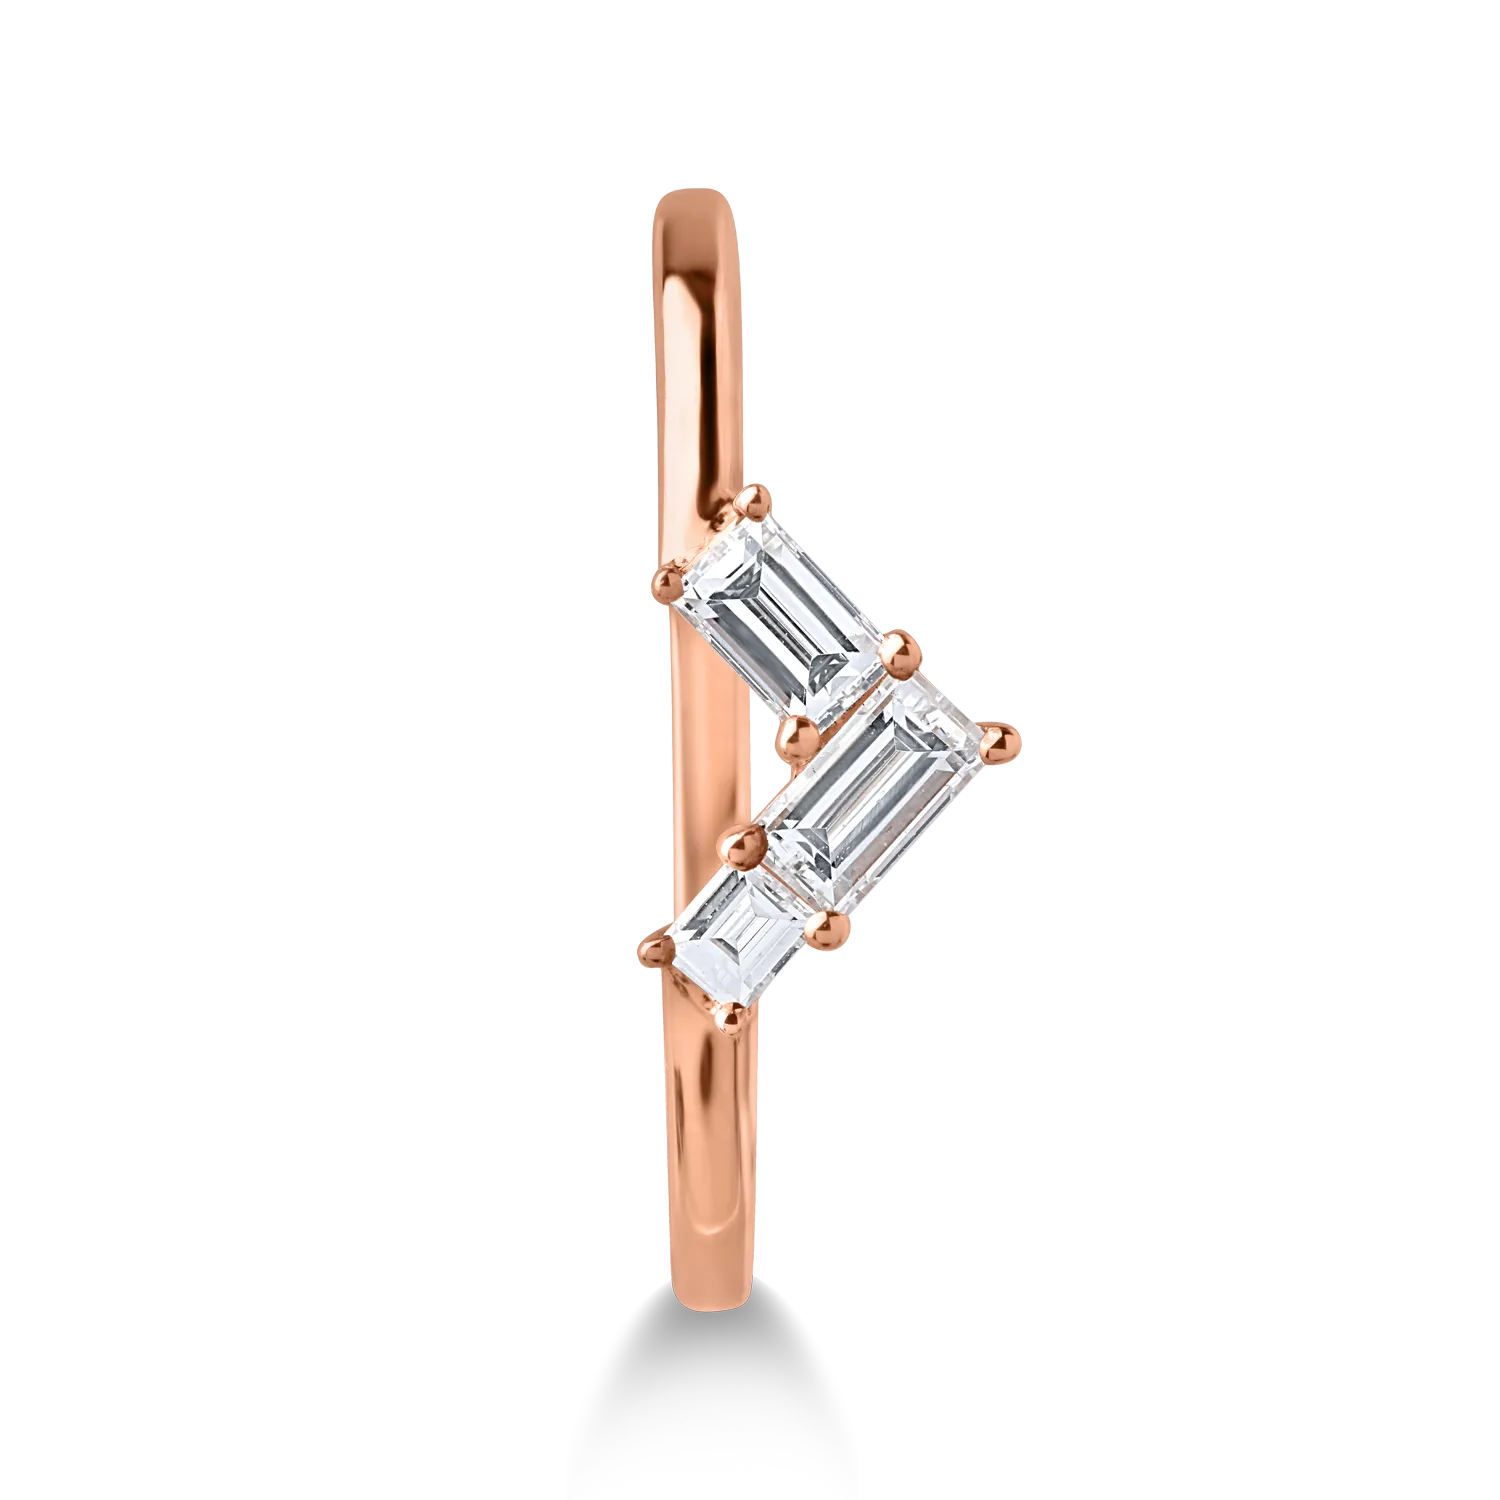 Rose gold ring with 0.28ct diamonds